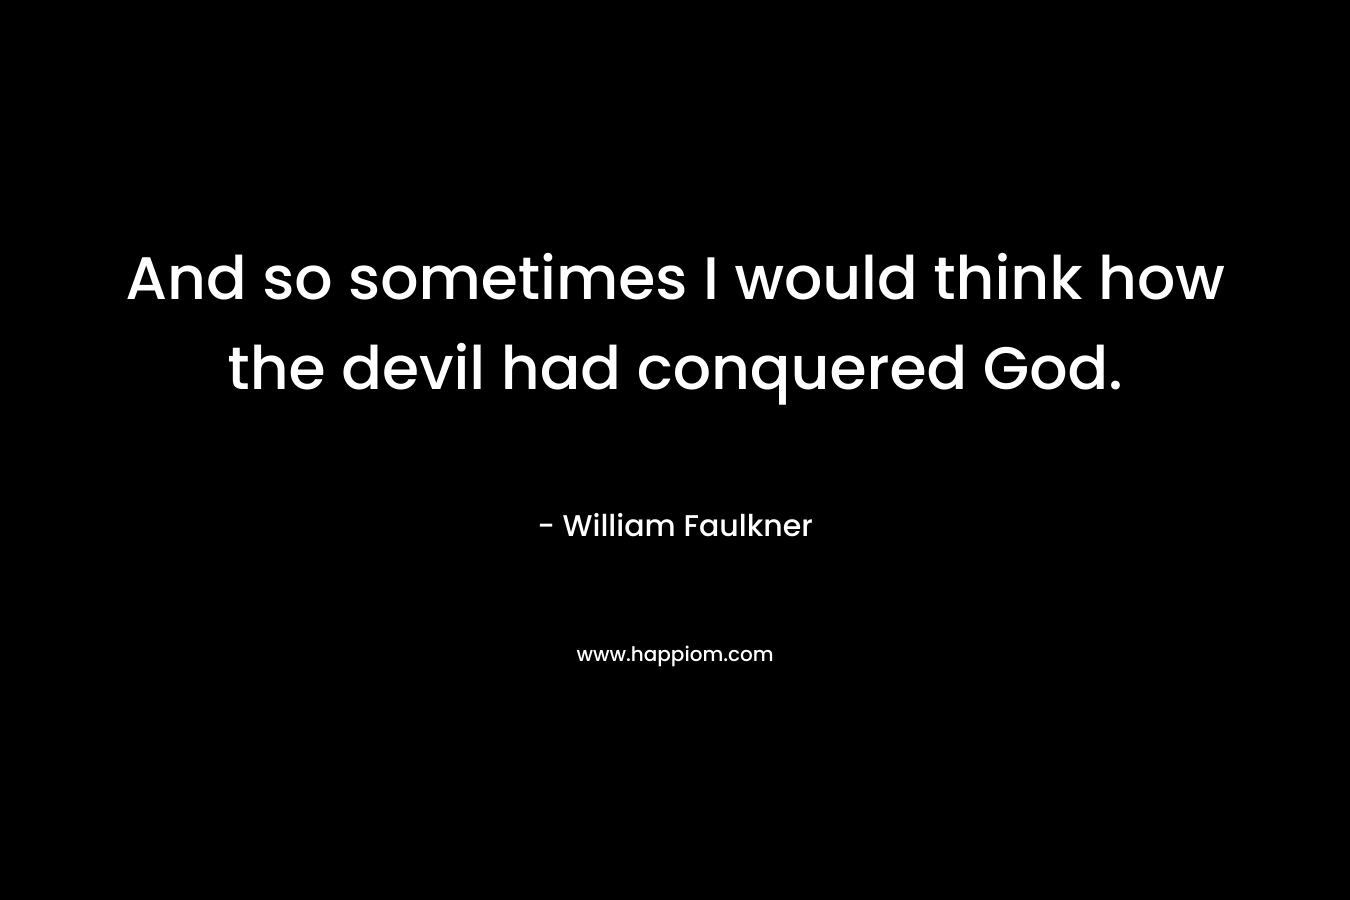 And so sometimes I would think how the devil had conquered God. – William Faulkner